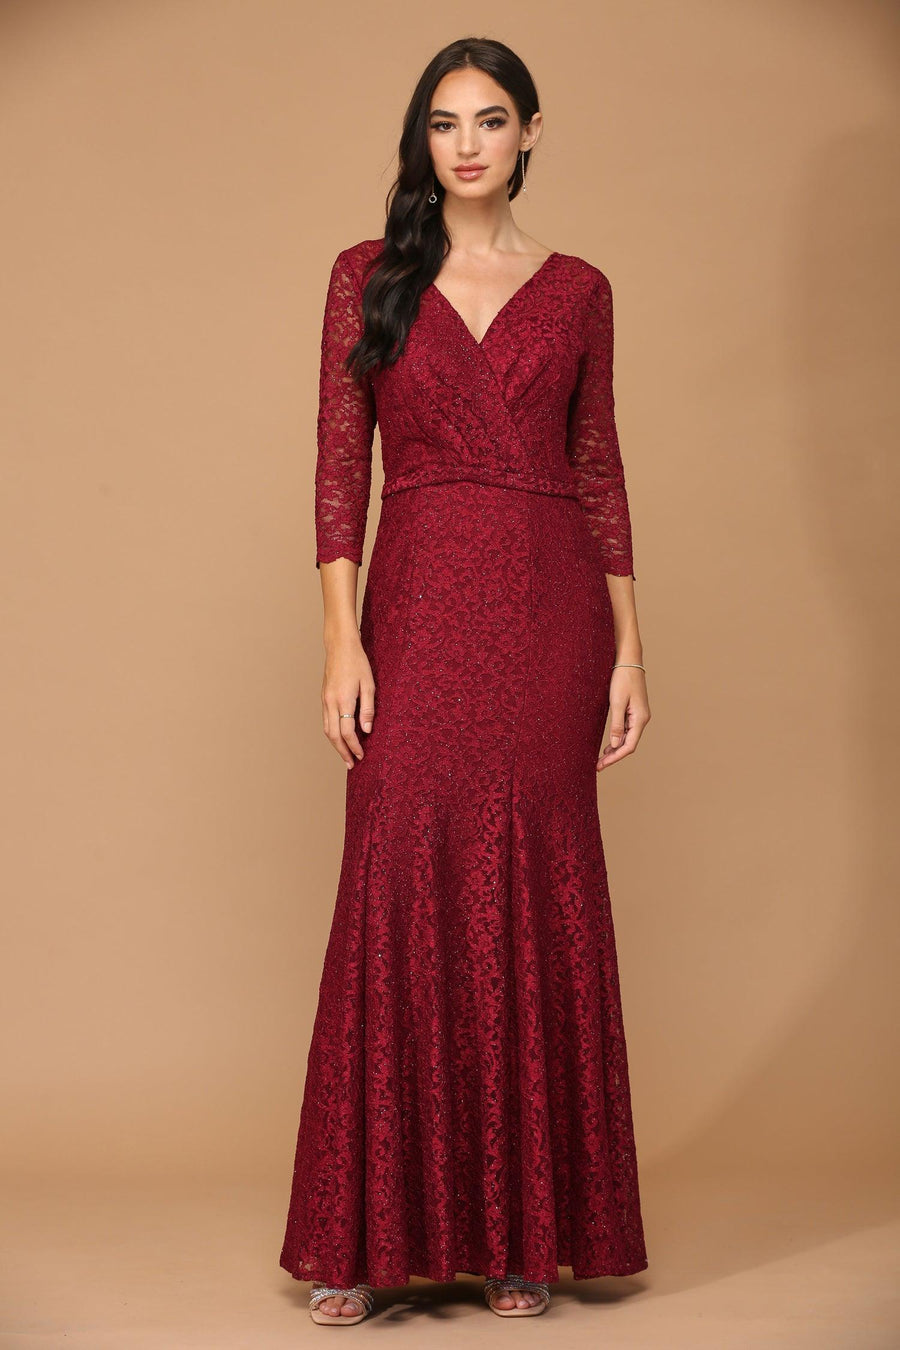 Burgundy L Long 3/4 Sleeve Mother of the Bride Lace Dress Sale